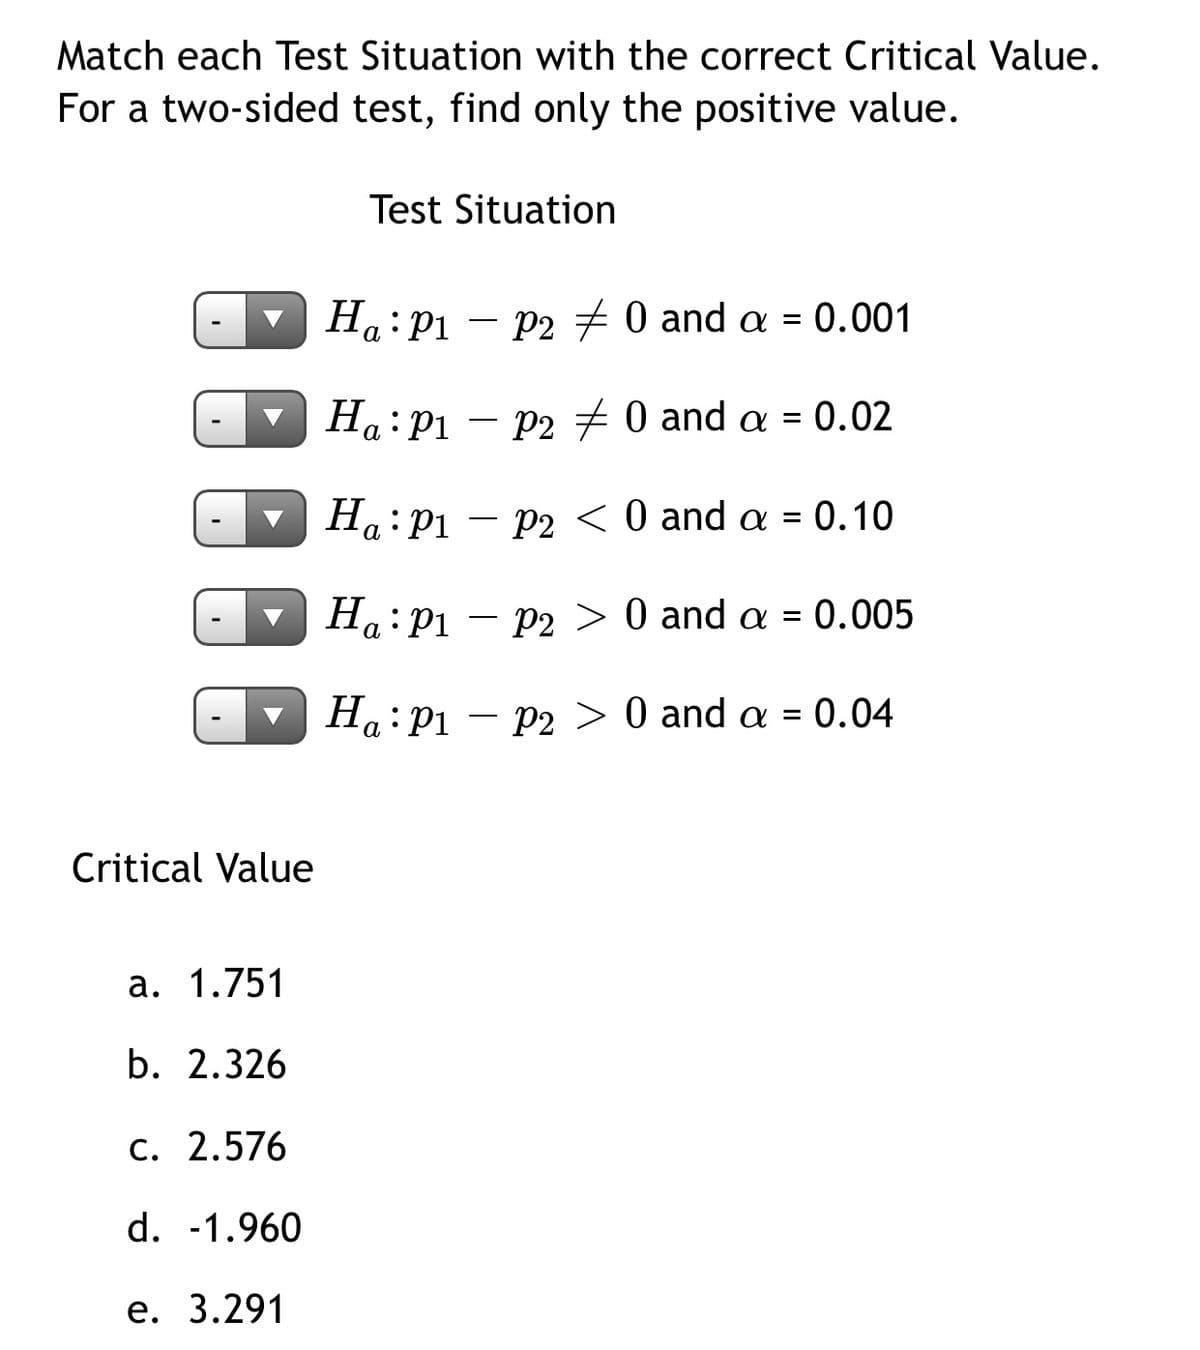 Match each Test Situation with the correct Critical Value.
For a two-sided test, find only the positive value.
Test Situation
Ha: P1
P2 + 0 and a = 0.001
Ha:Pi – P2 7 0 and a = 0.02
Ha:P1 – p2 < 0 and a = 0.10
Ha:P1 – P2 > 0 and a =
0.005
Ha: P1 – P2 > 0 and a = 0.04
Critical Value
a. 1.751
b. 2.326
с. 2.576
d. -1.960
е. 3.291
